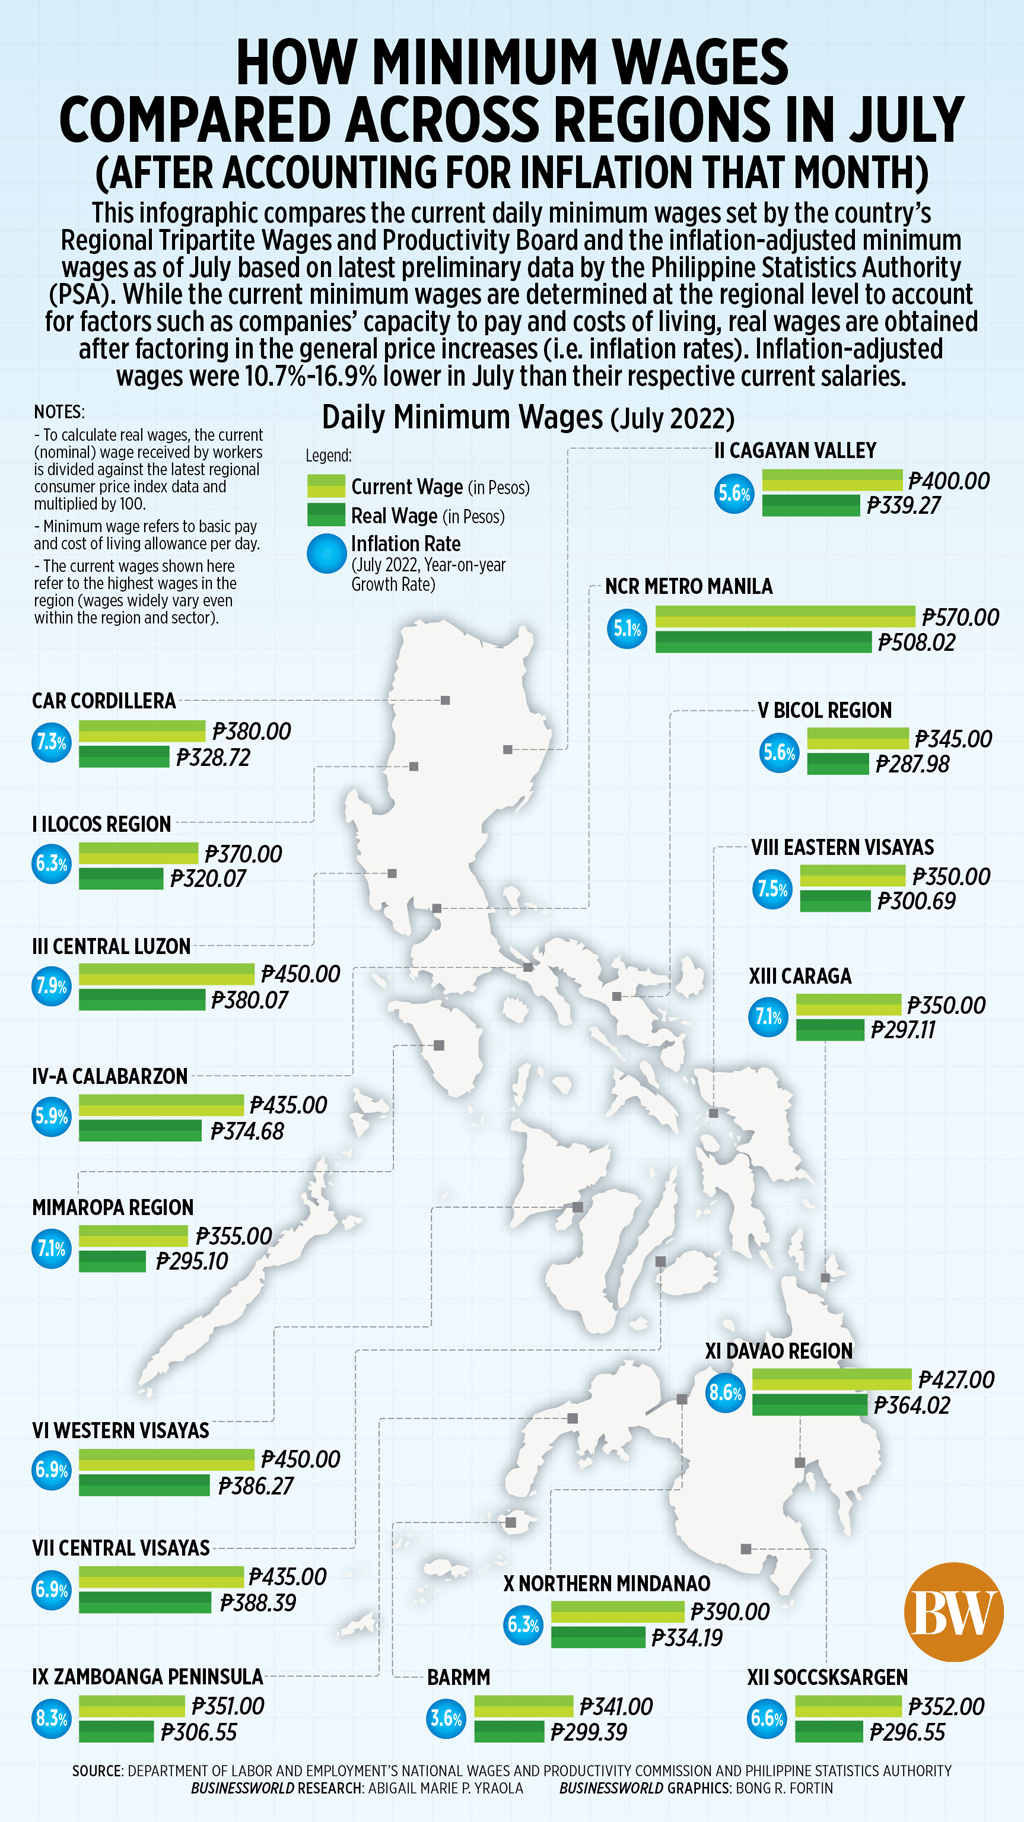 How minimum wages compared across regions in July